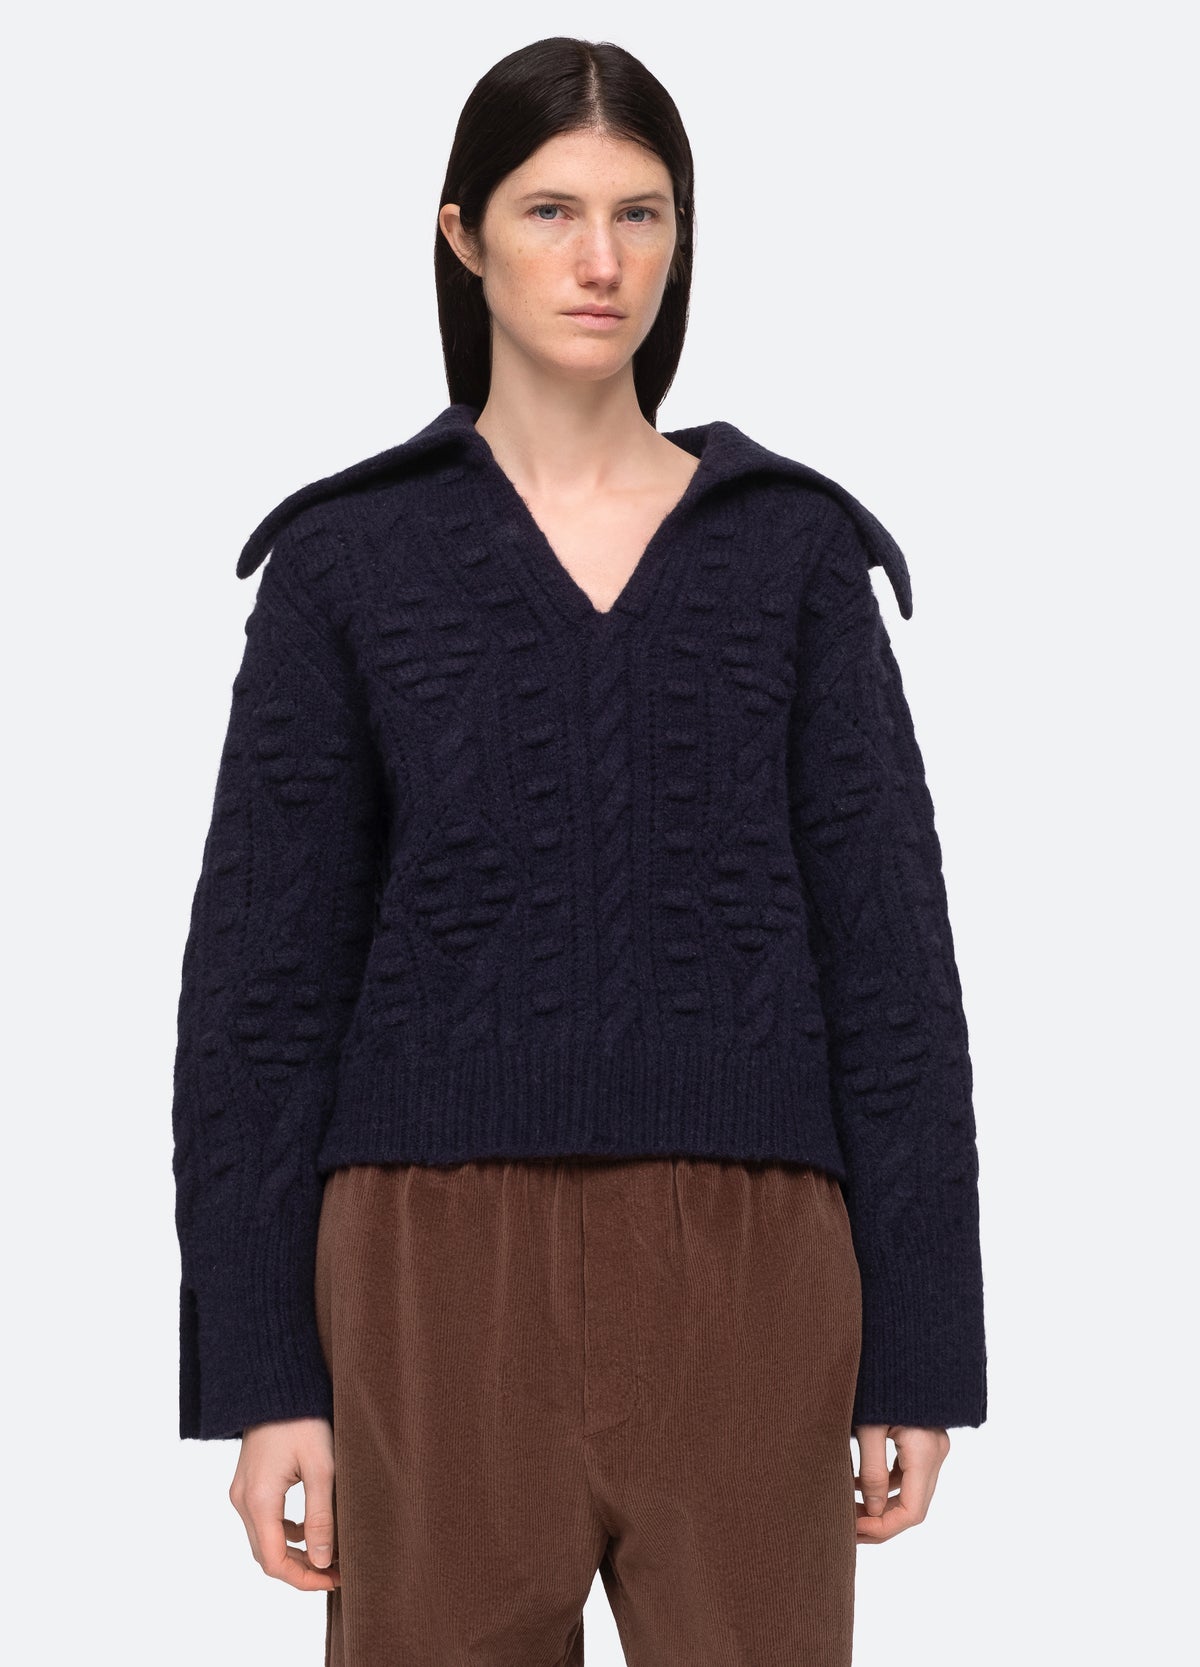 navy-cele sweater-front view - 7